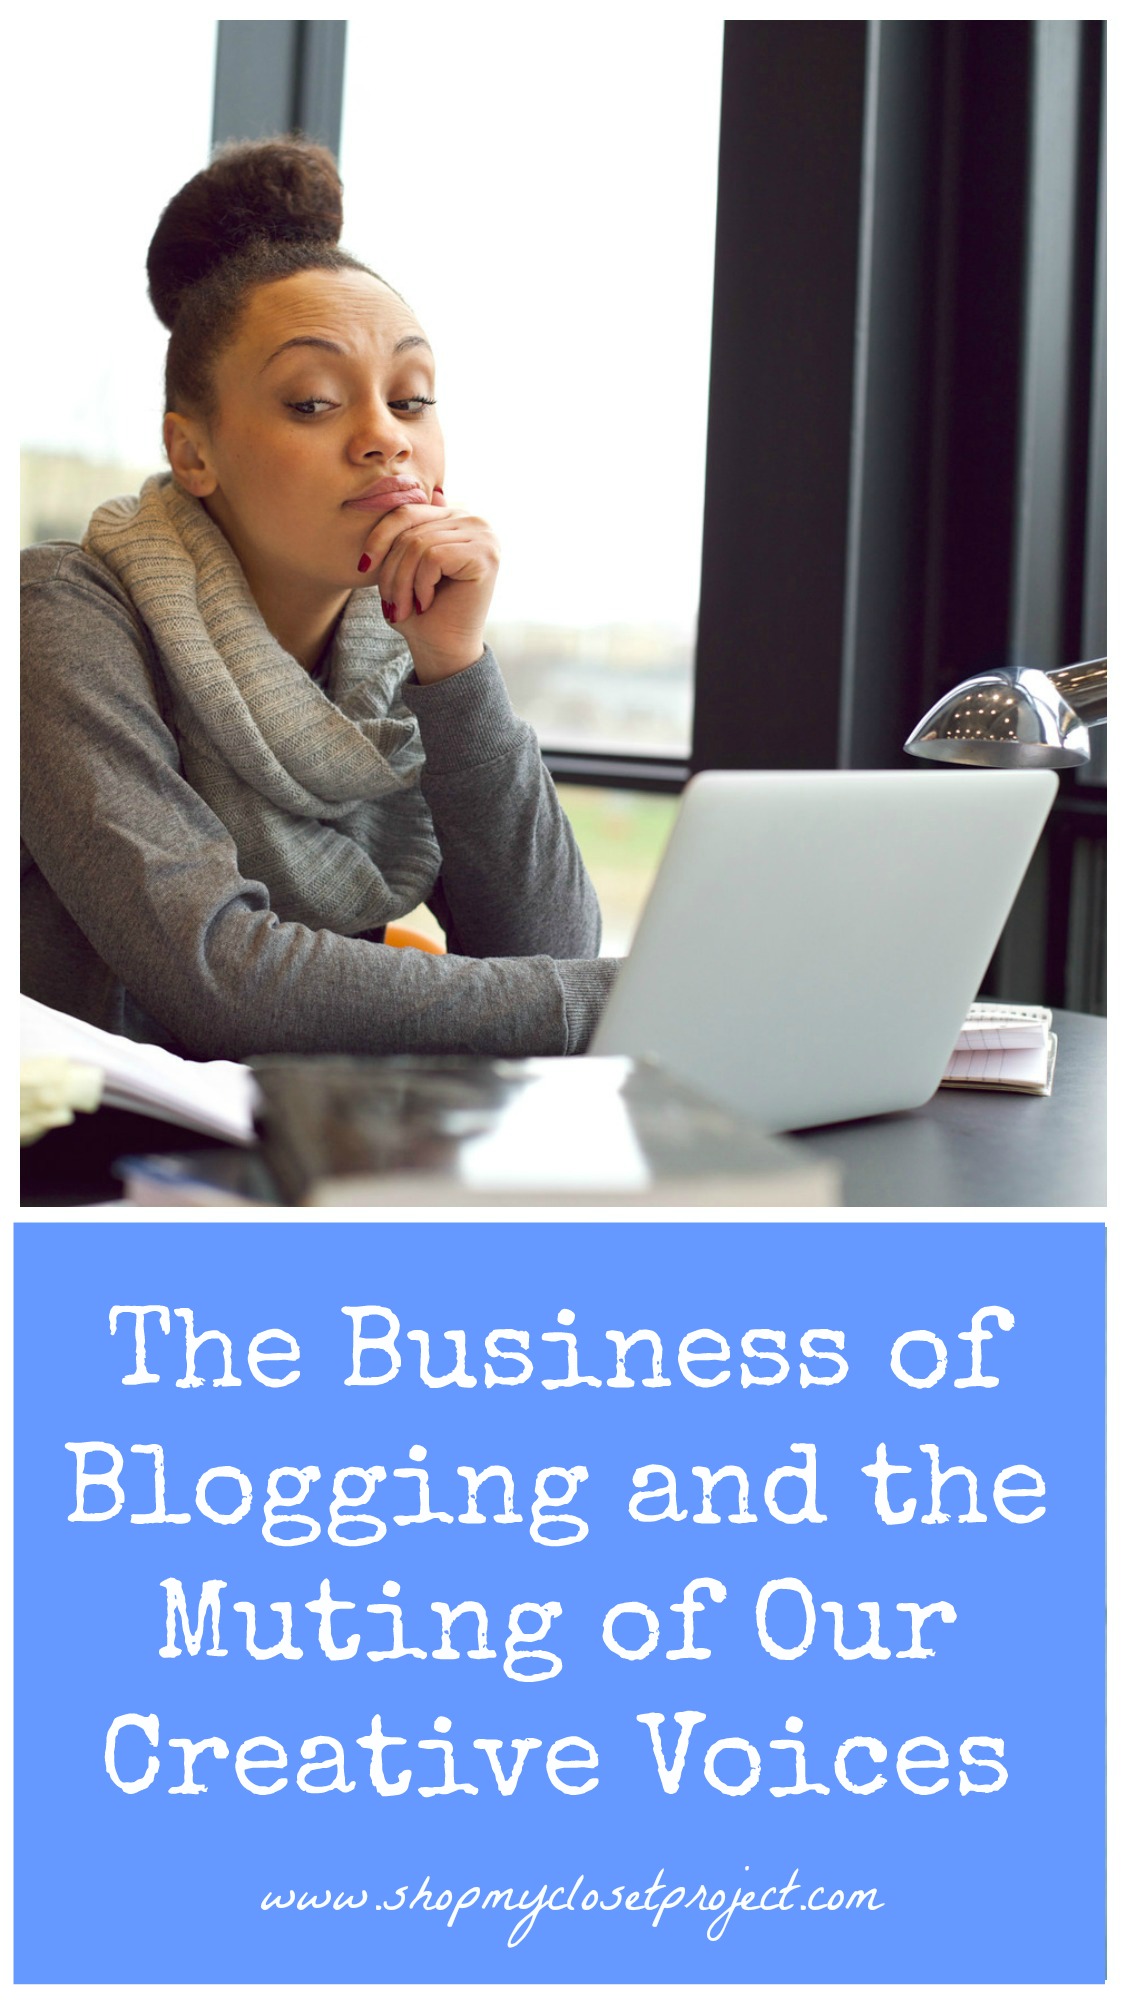 The Business of Blogging and the Muting of Our Creative Voices